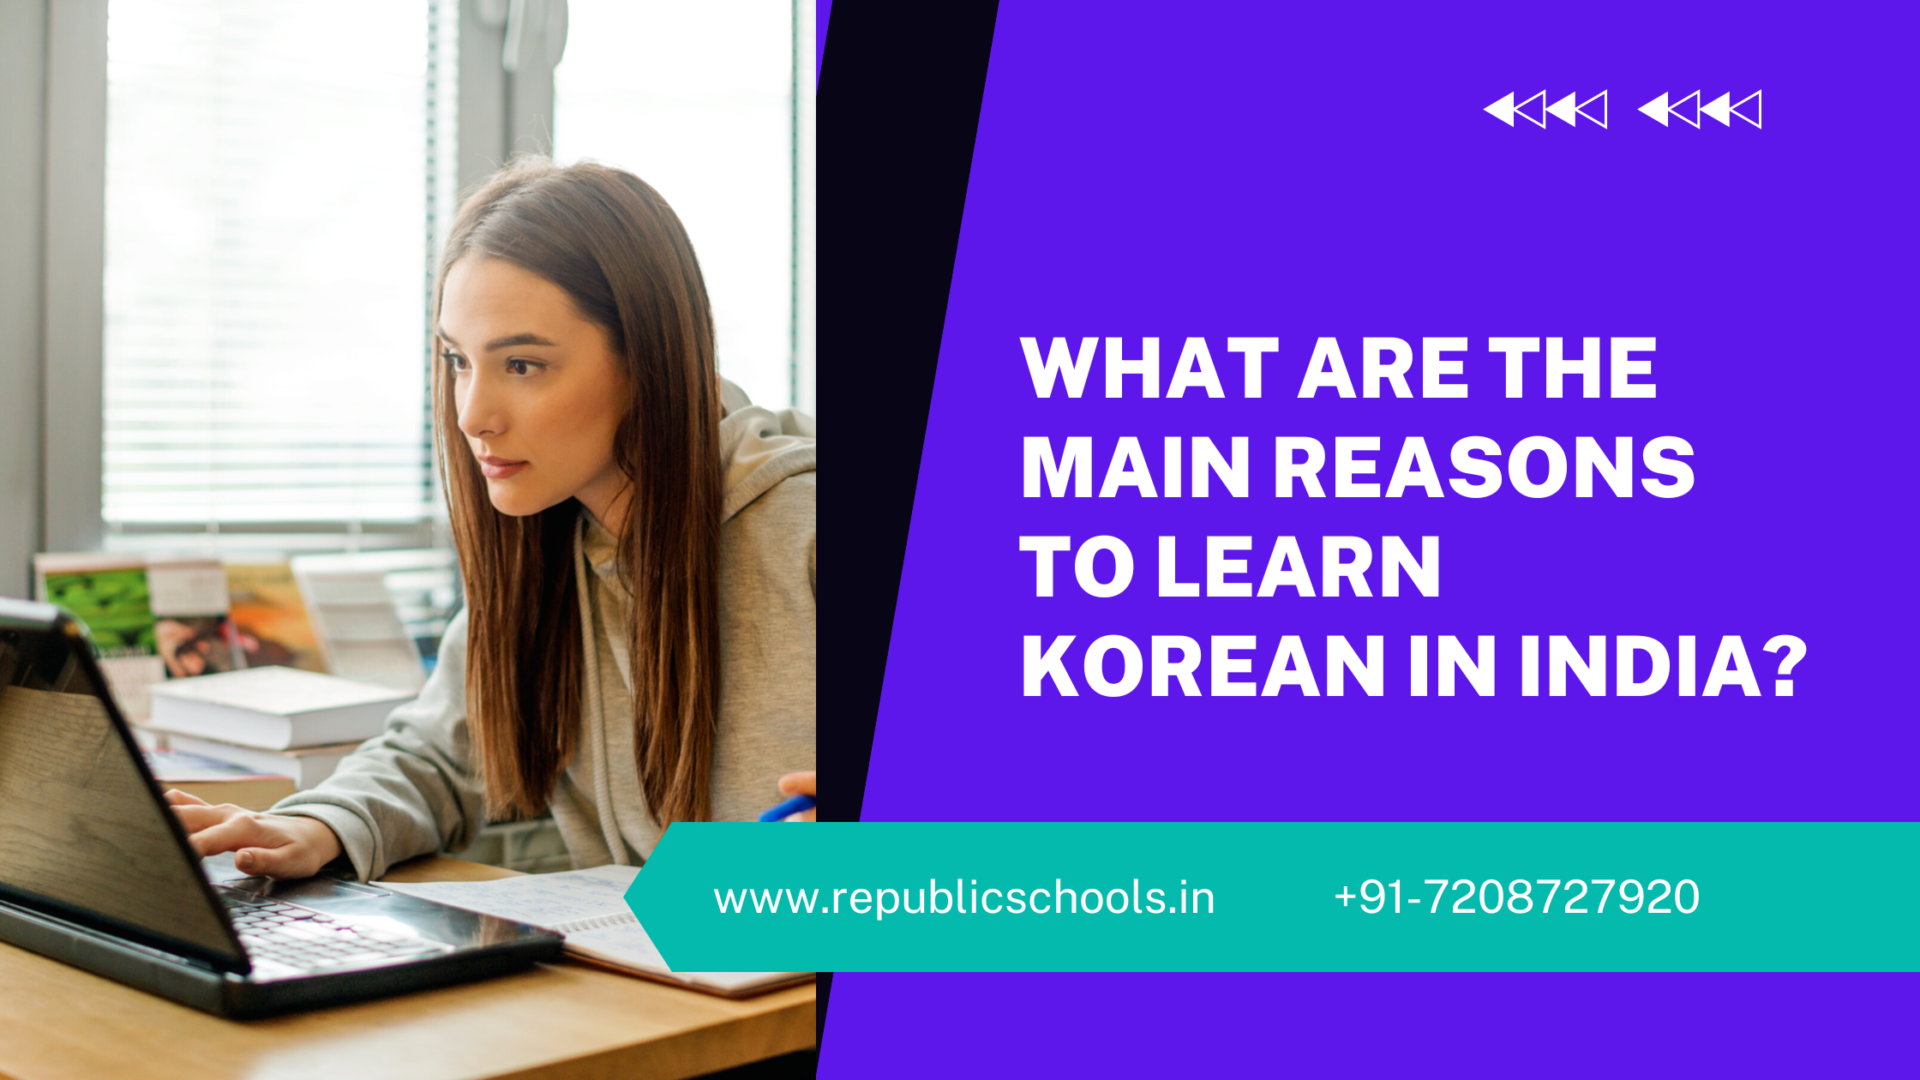 What Are The Main Reasons To Learn Korean In India?